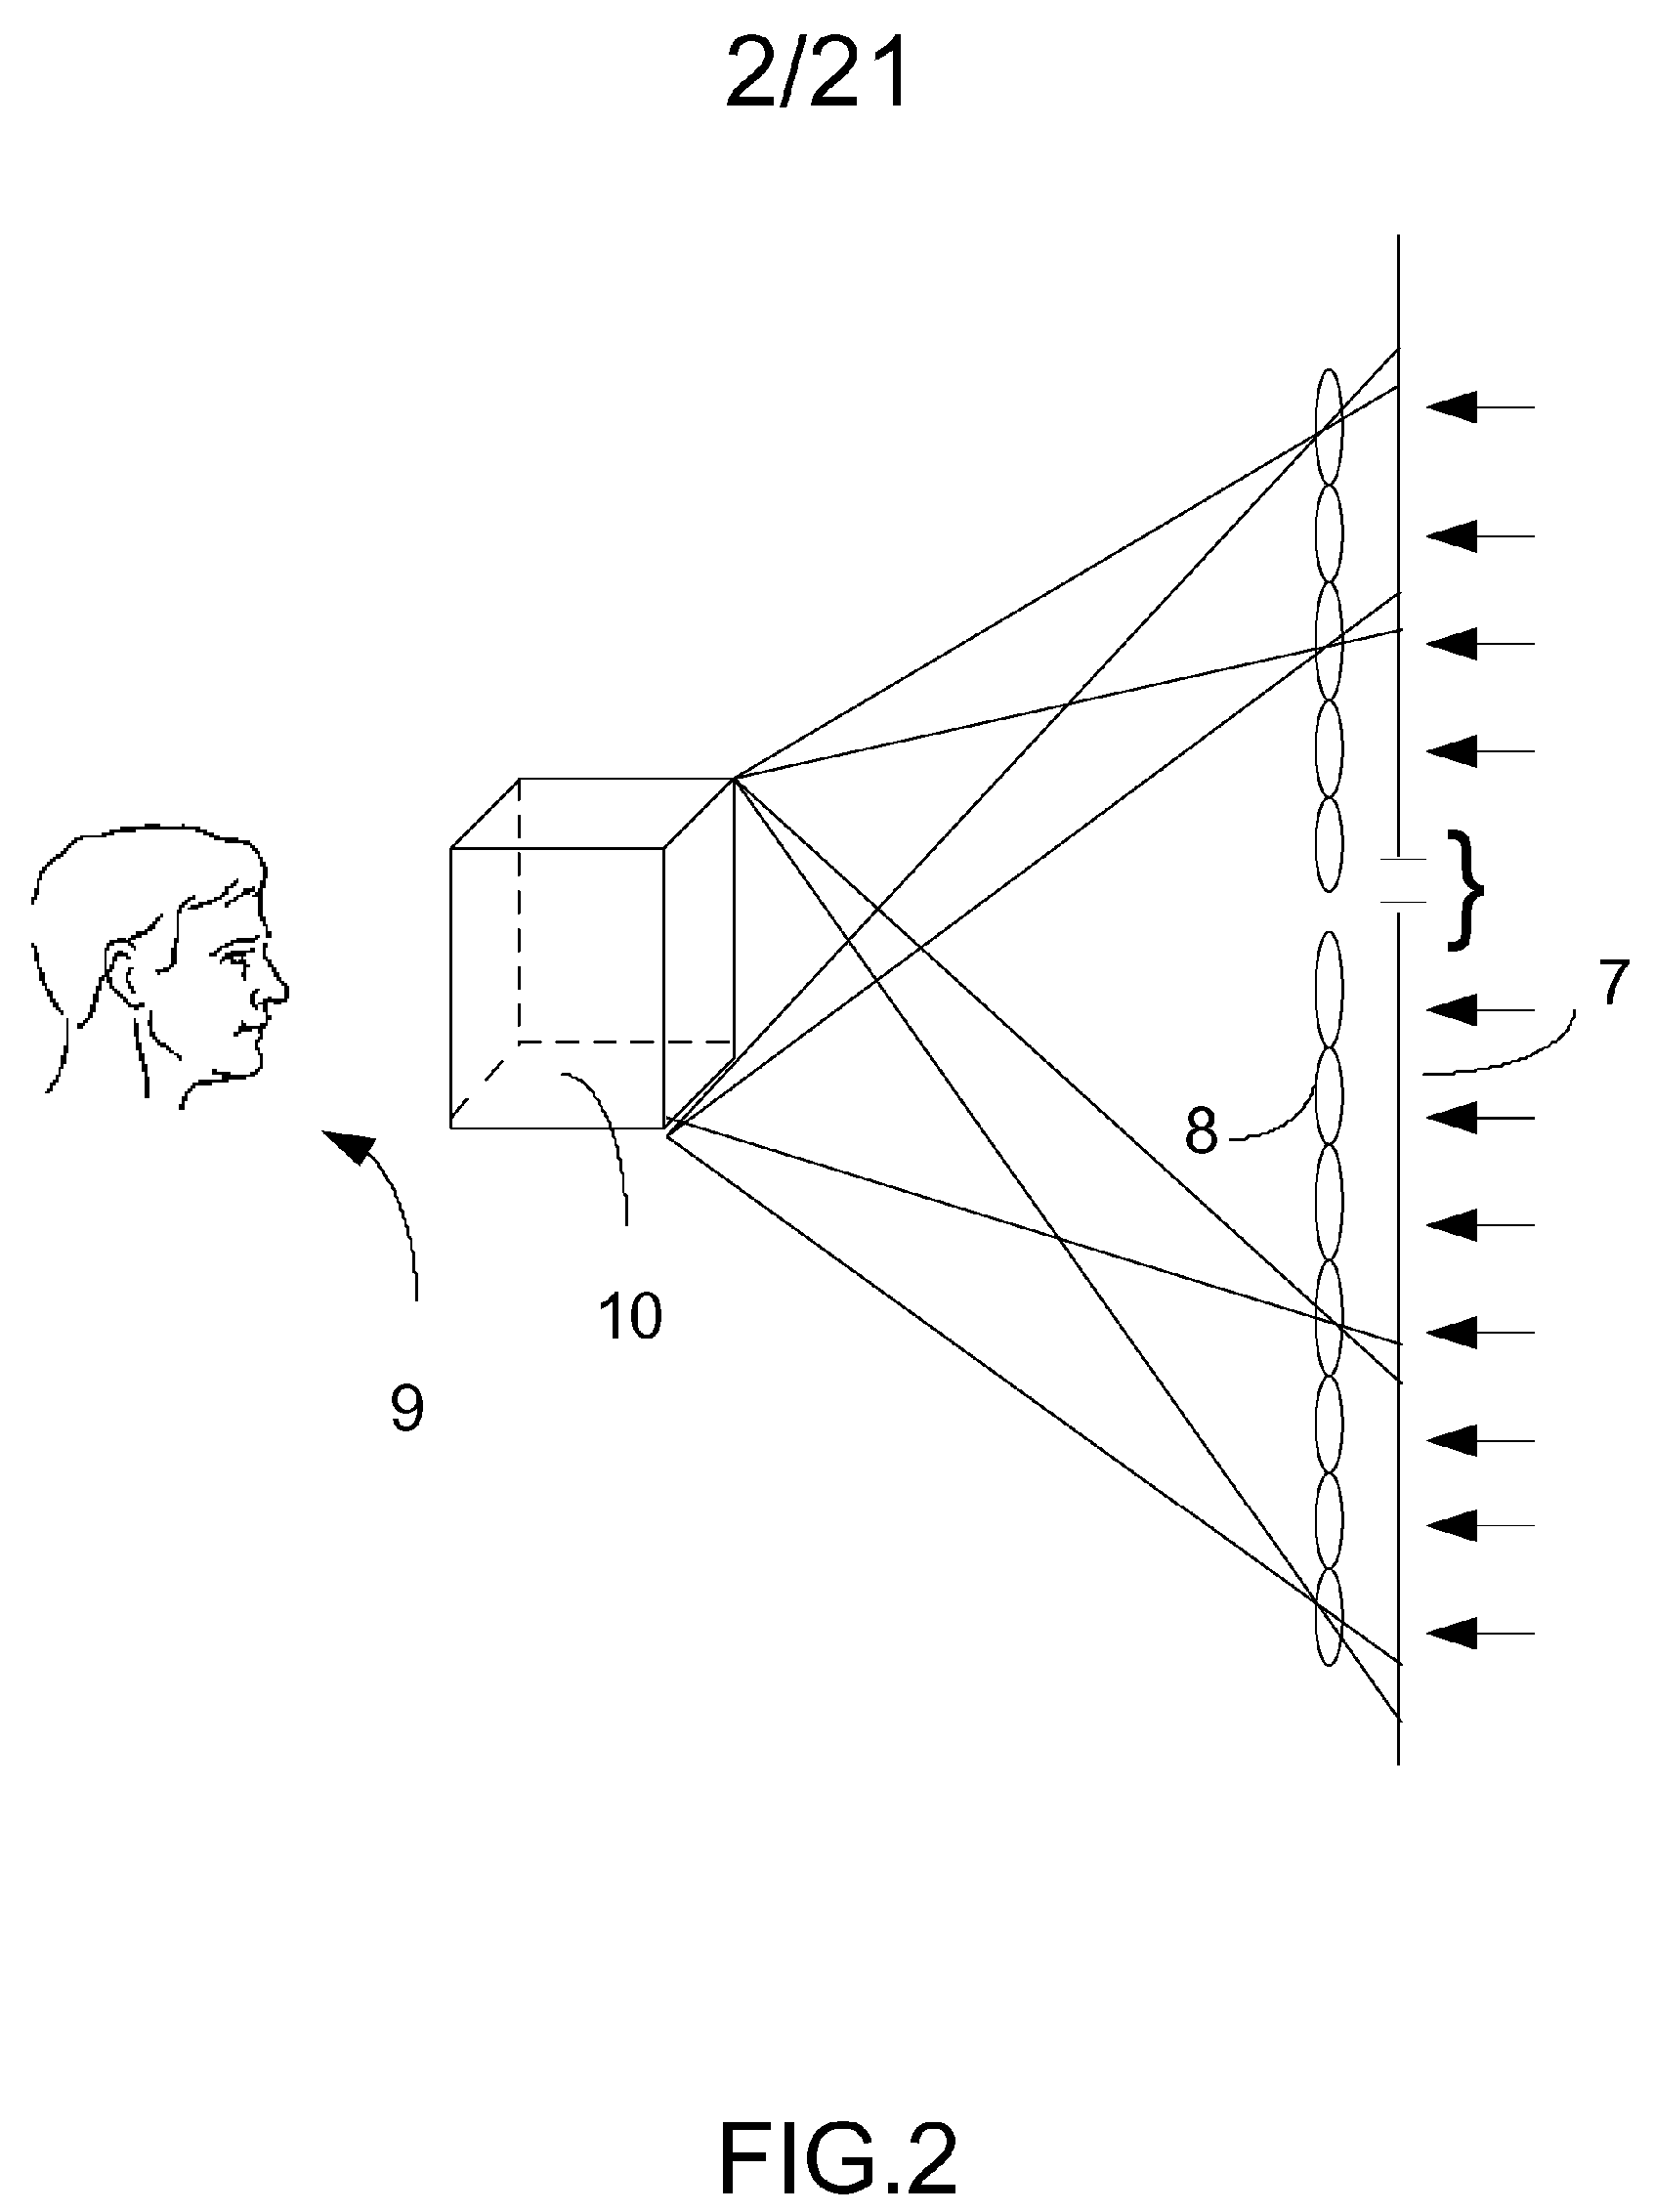 Method for creating a holographic screen that reconstructs uniformly magnified three-dimensional images from projected integral photographs